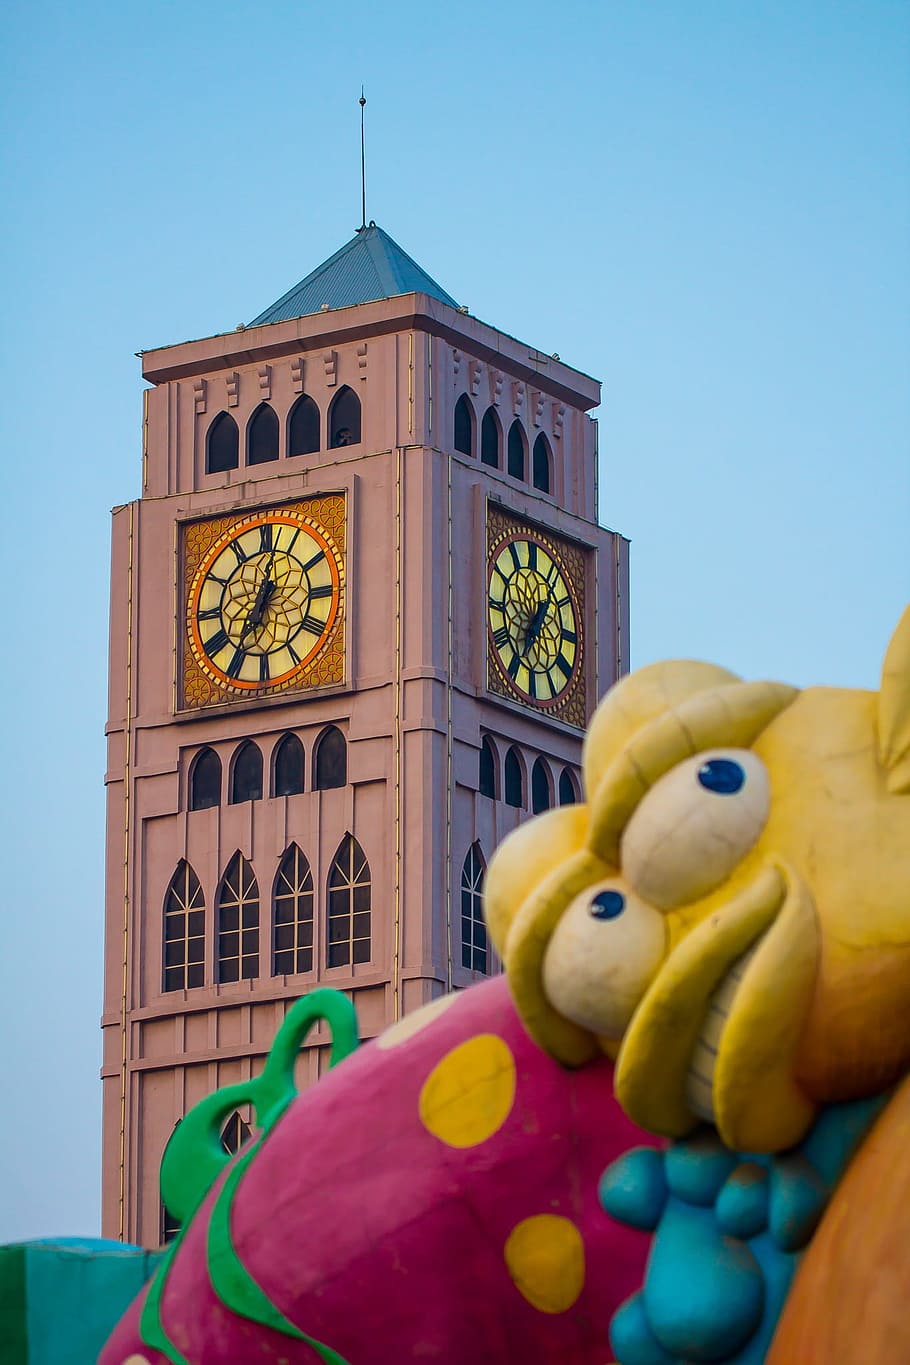 Shijingshan, The Bell Tower, yellow croaker, architecture, clock tower